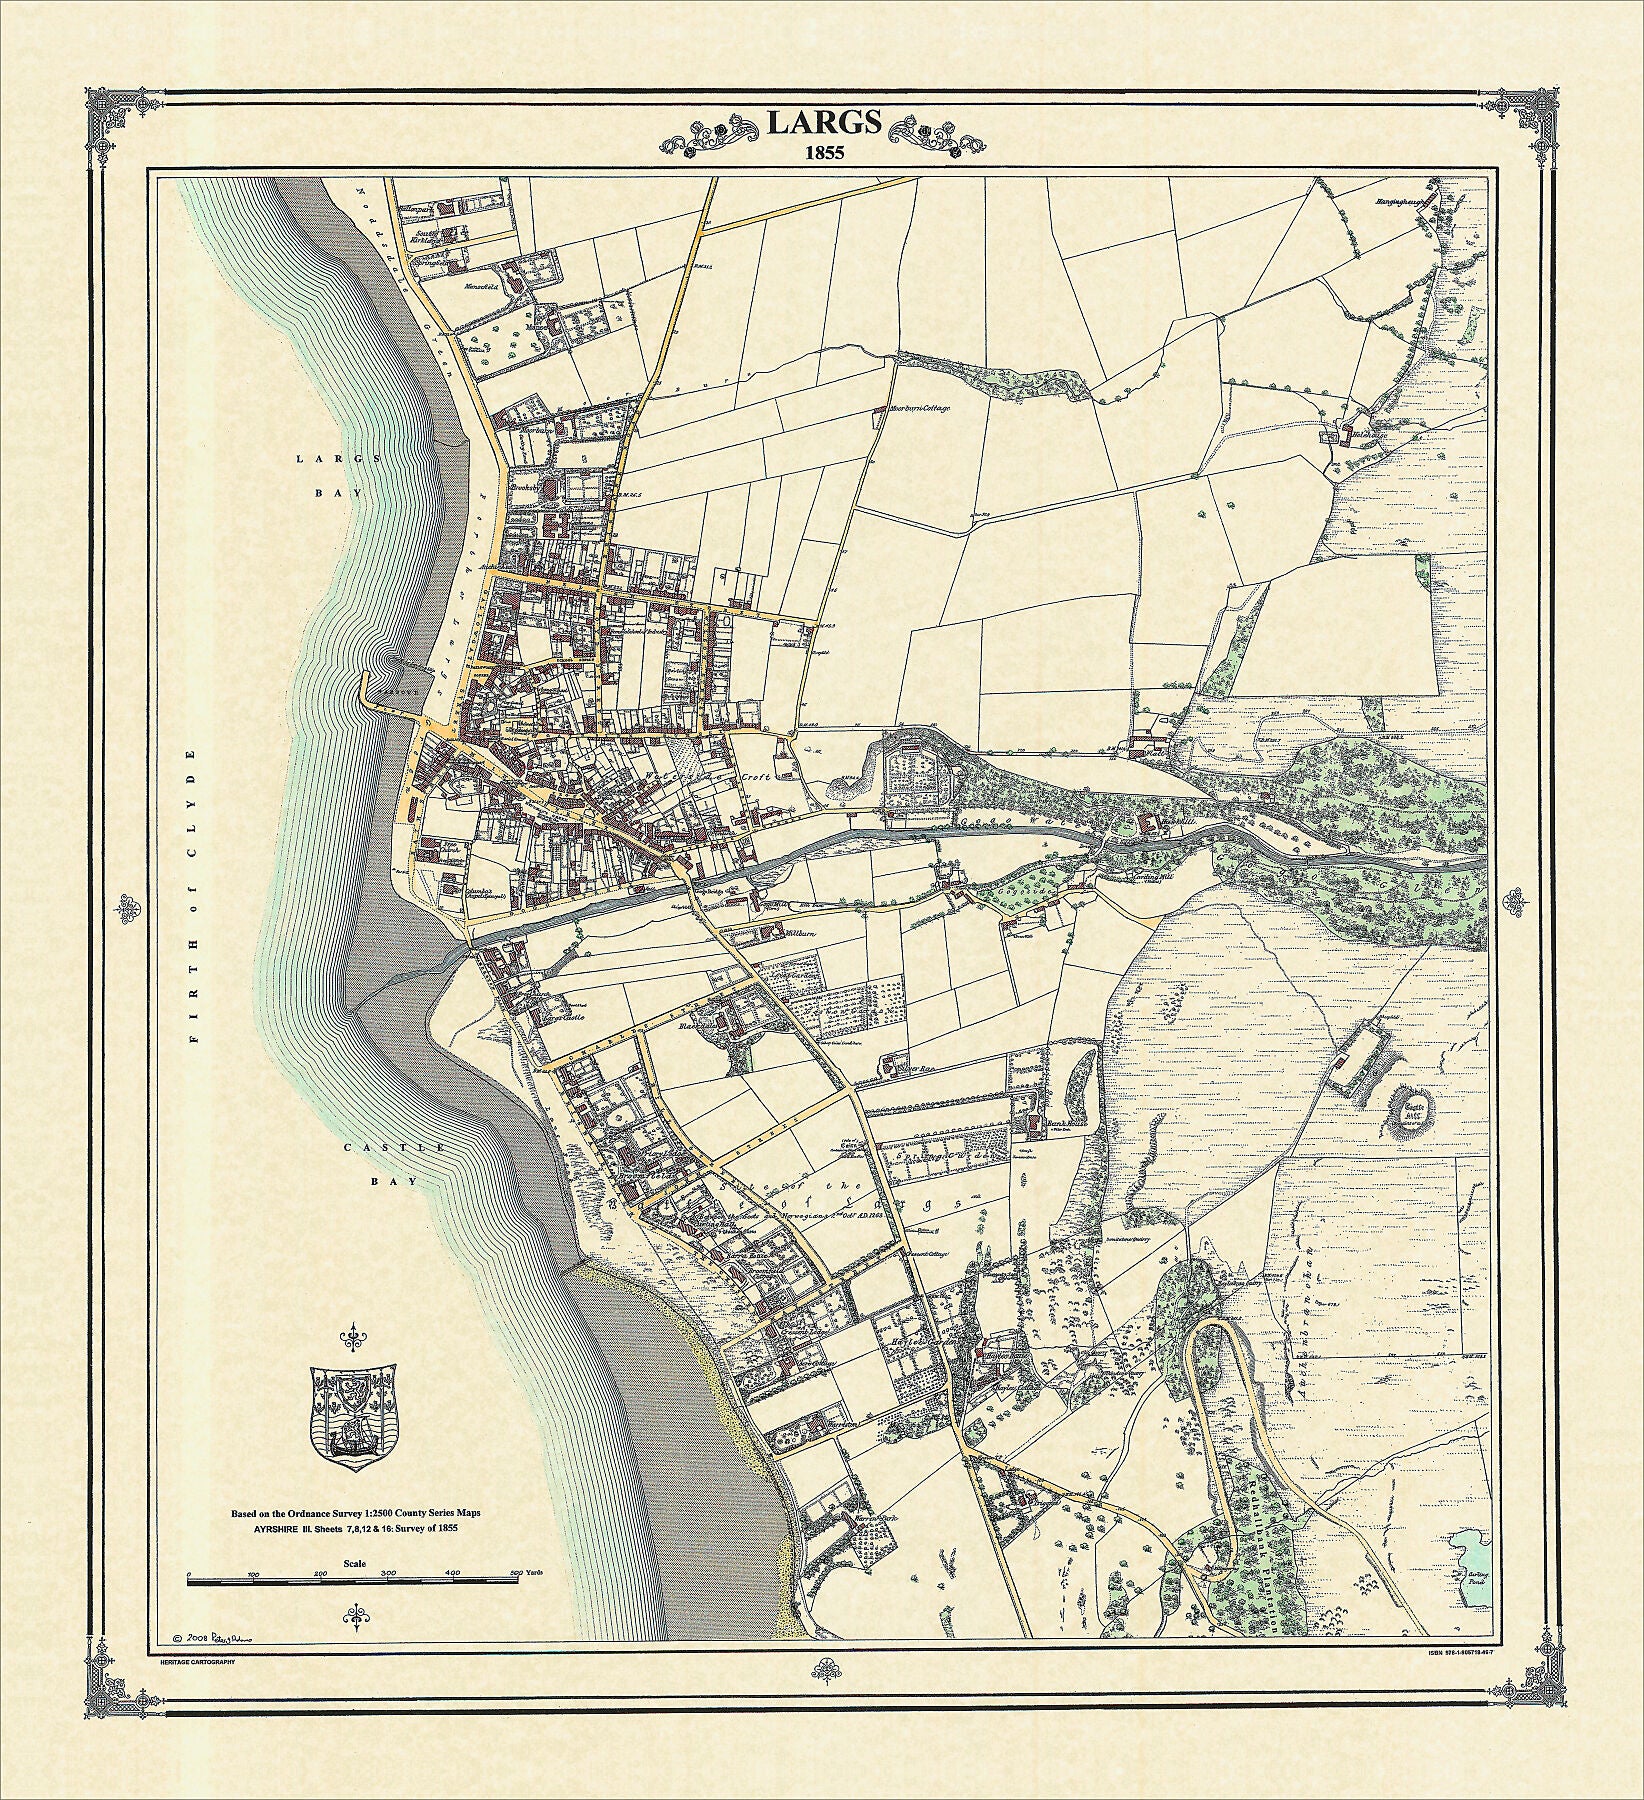 Coloured Victorian map of Largs in 1855 by Peter J Adams of Heritage Cartography